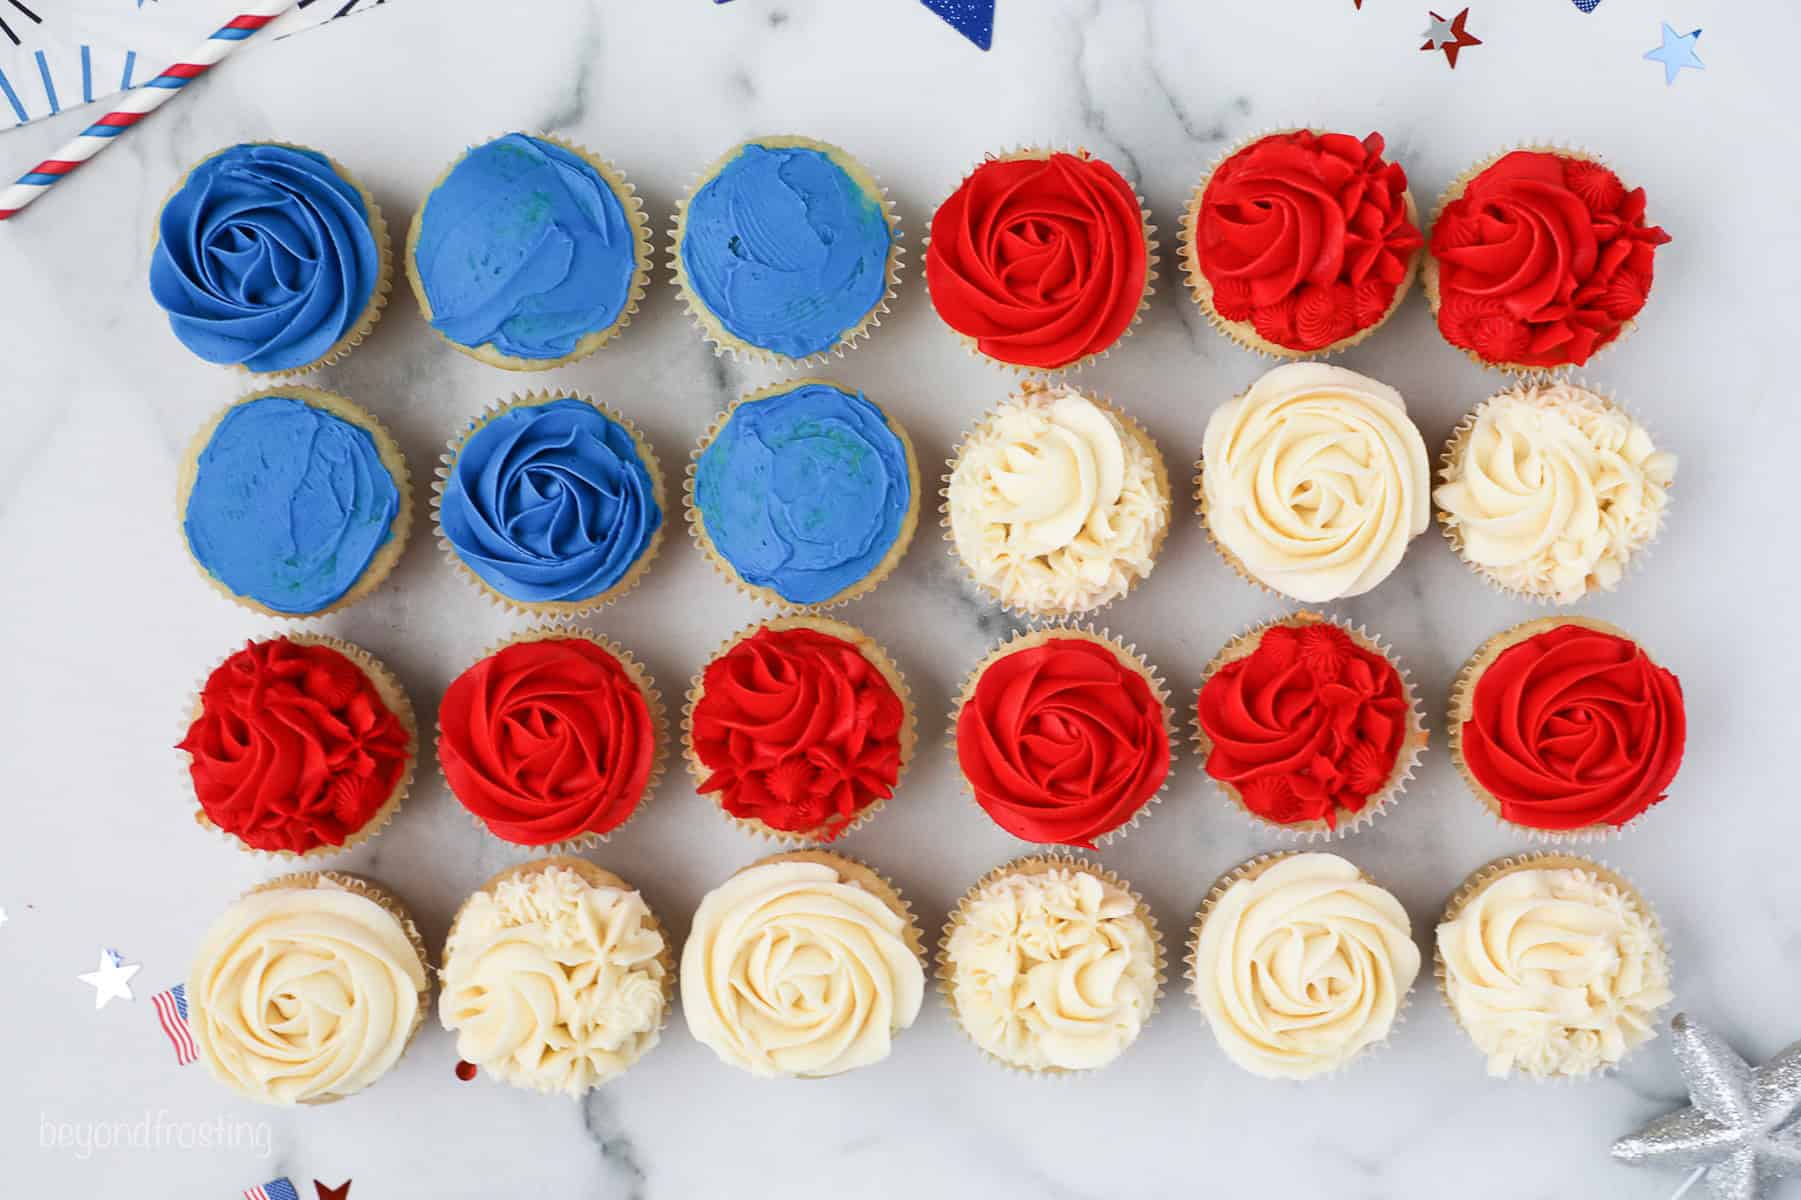 Overhead view of 24 cupcakes frosted red, white, and blue arranged in the shape of an American flag.